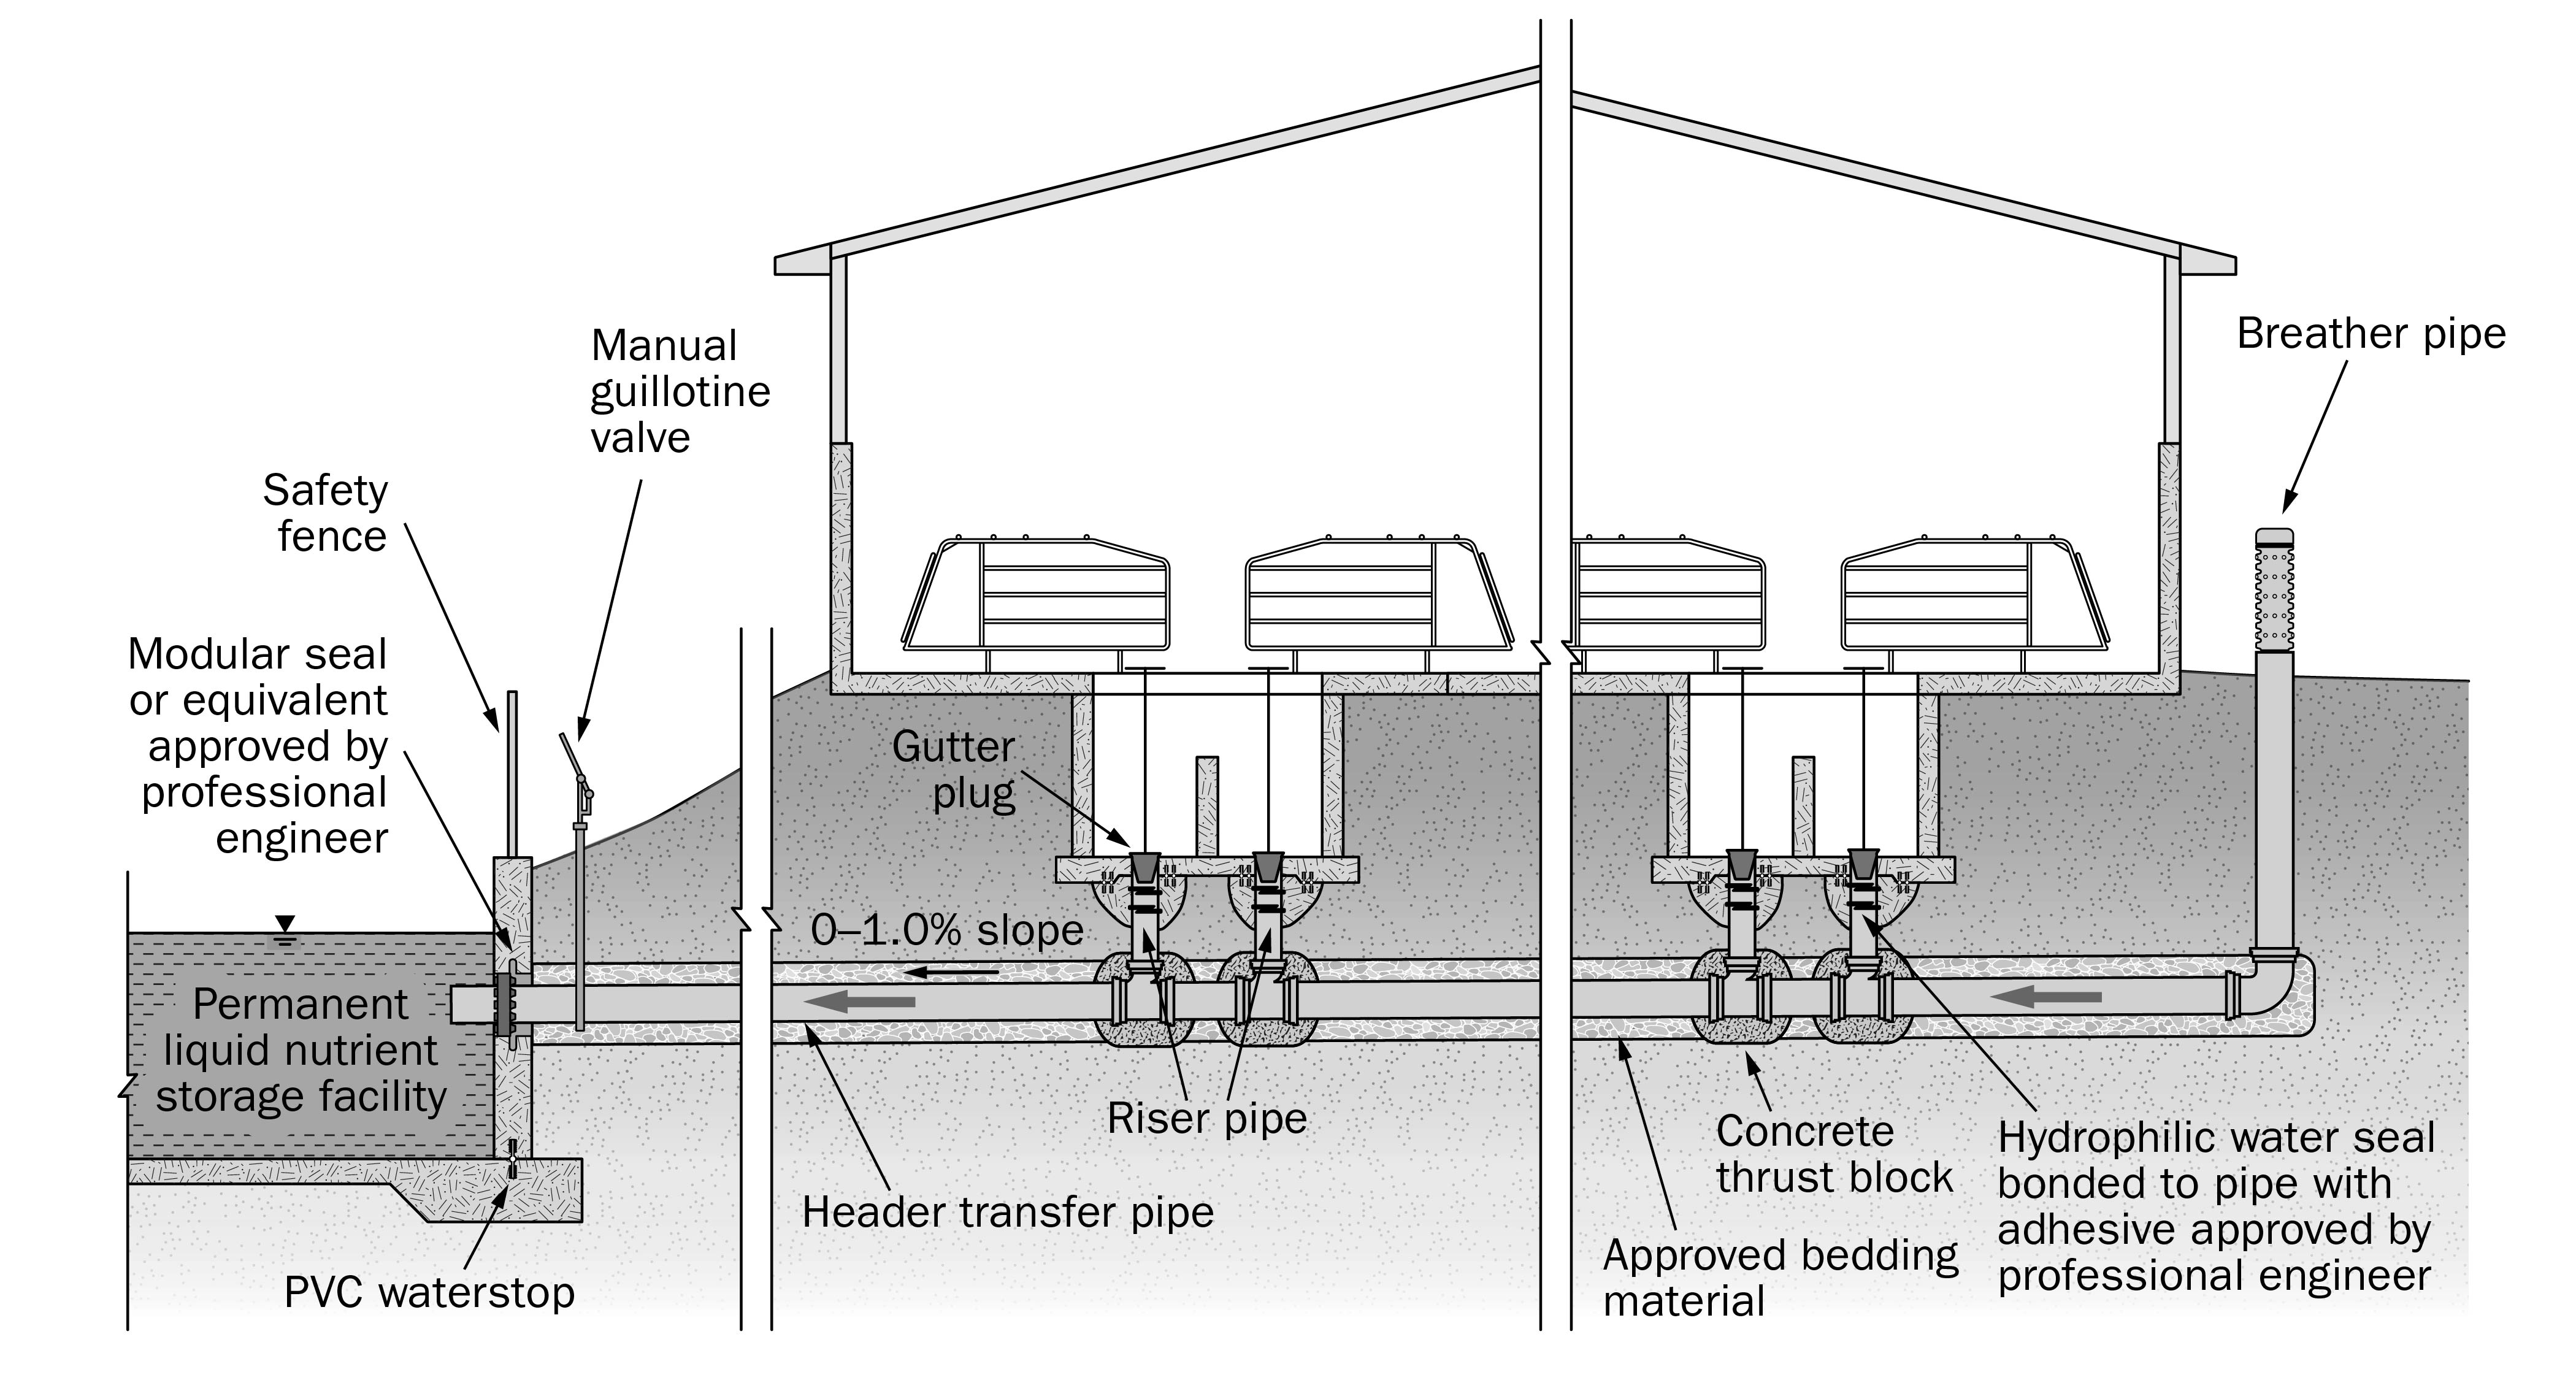 A drawing showing a cross-section of a common swine finishing barn gravity liquid manure system, where vertical riser pipes deliver manure from floor sumps to a horizontal transfer pipe below connected to a permanent liquid nutrient storage.